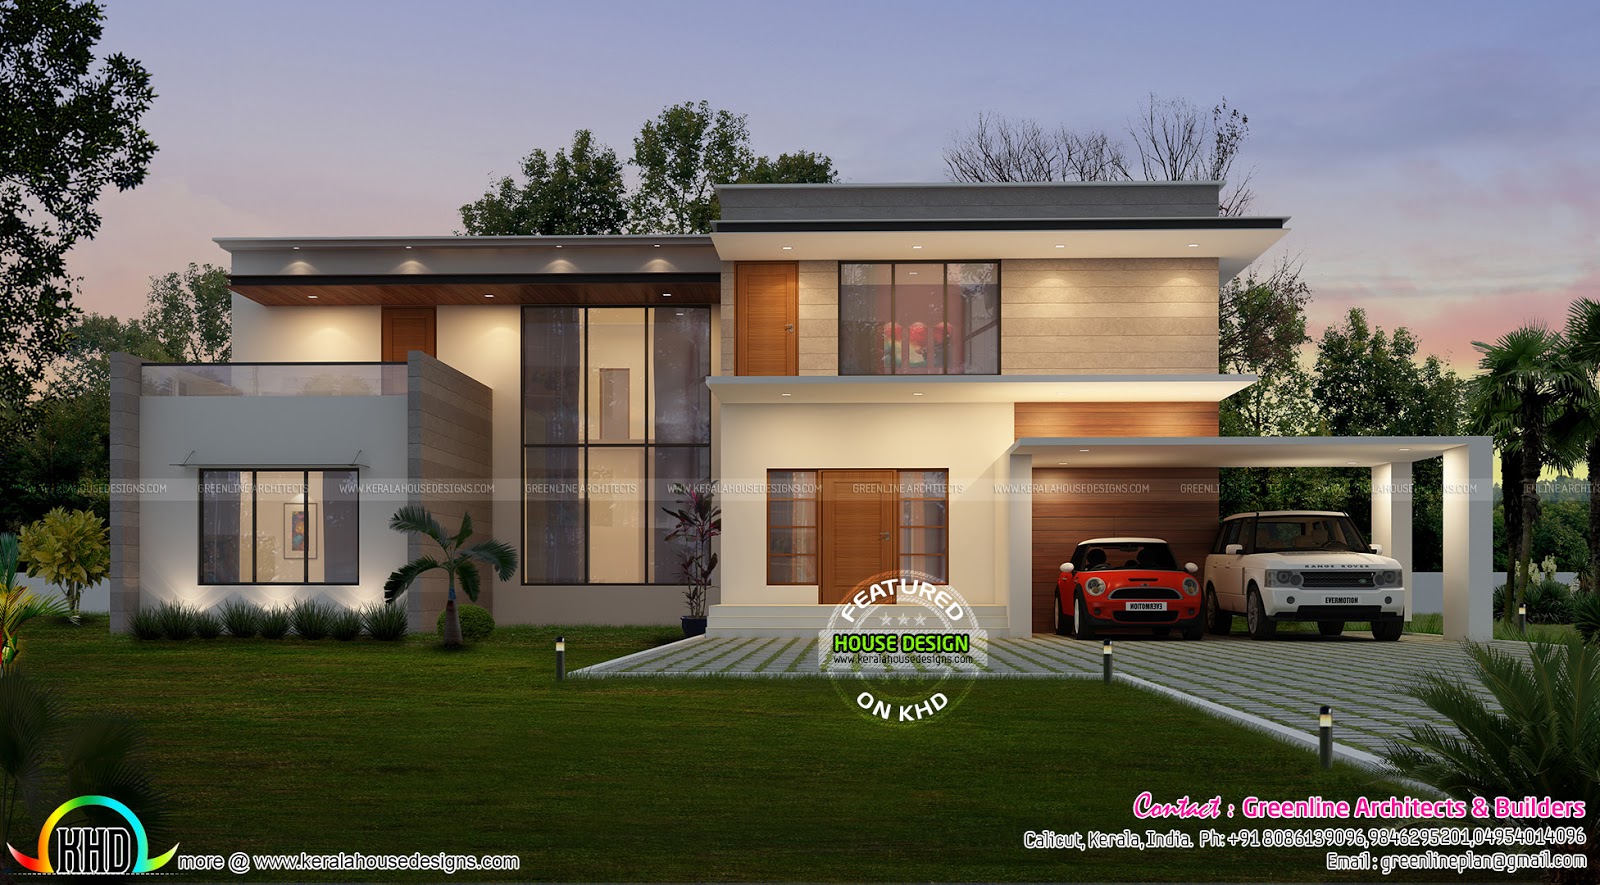 Most modern Kerala home - Kerala home design and floor plans - 8000+ houses